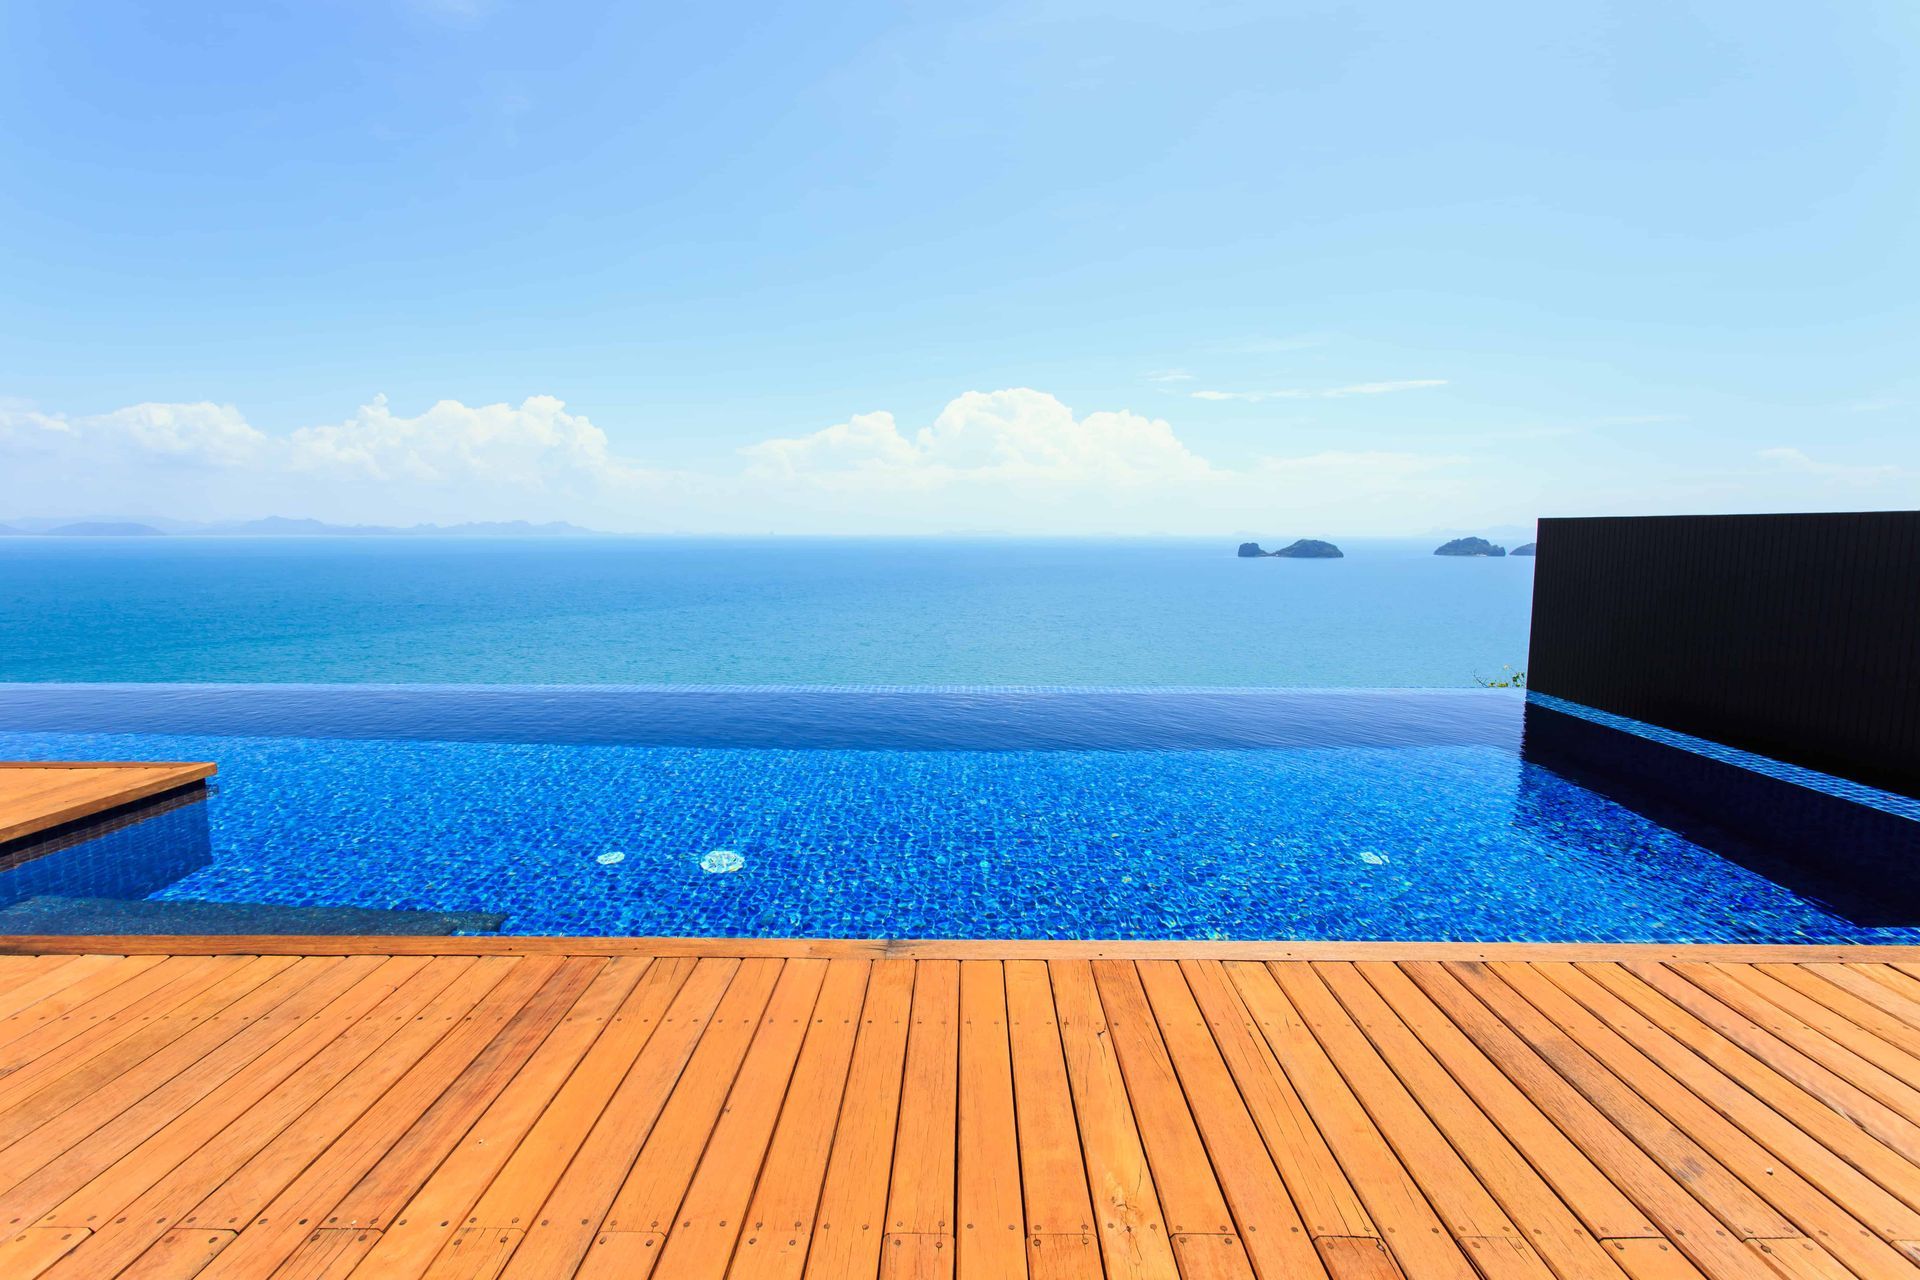 An infinity pool with blue water